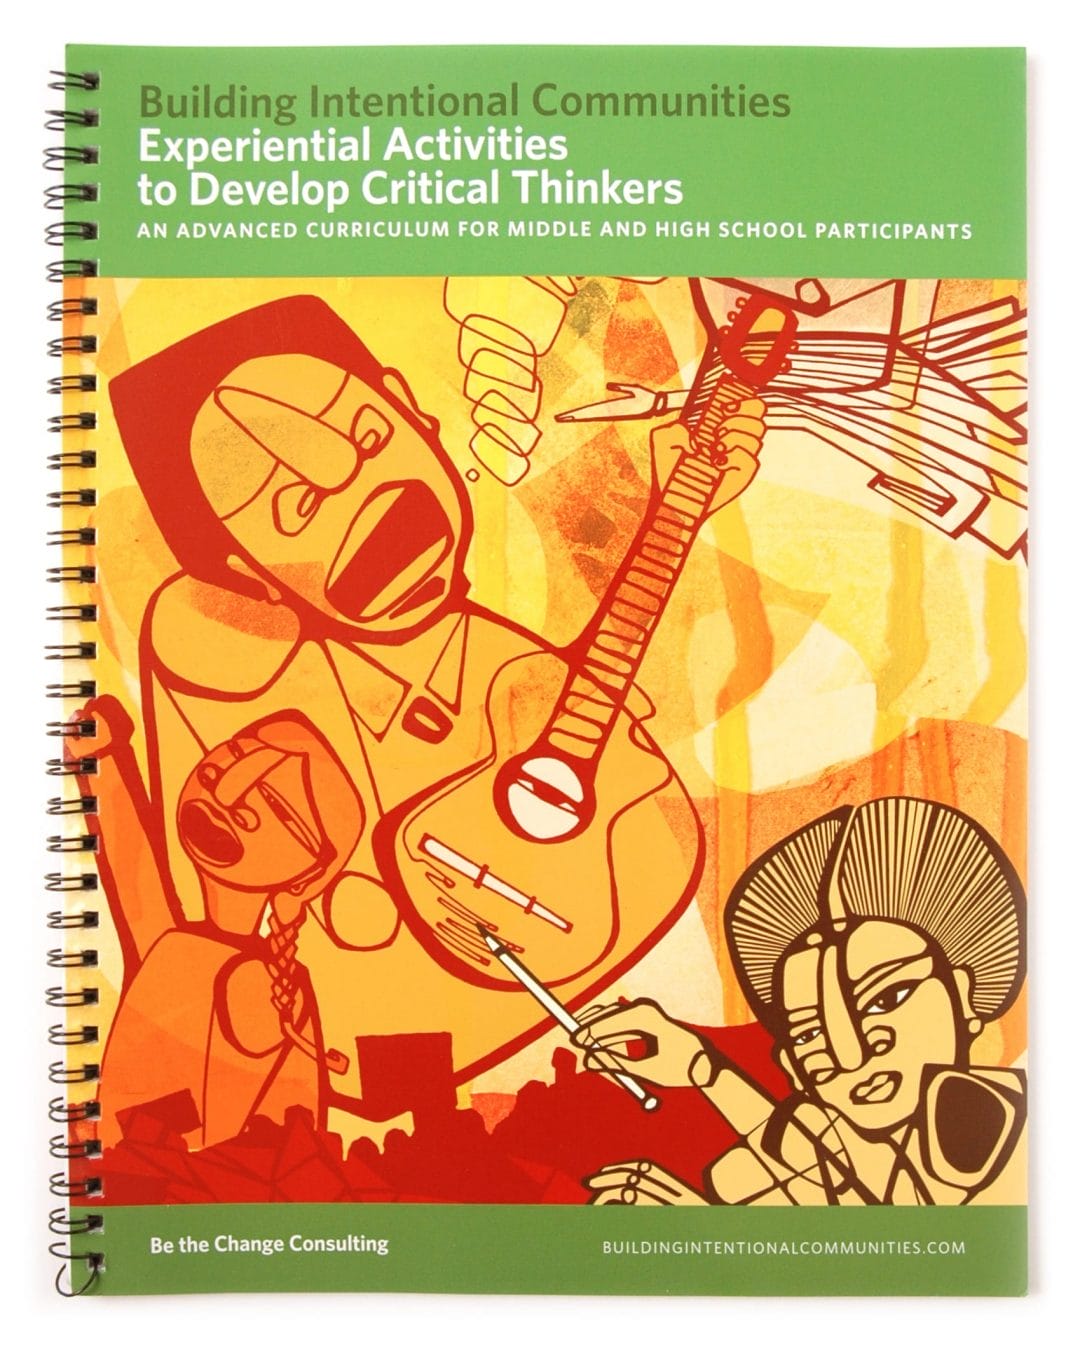 Experiential Activities to Develop Critical Thinkers